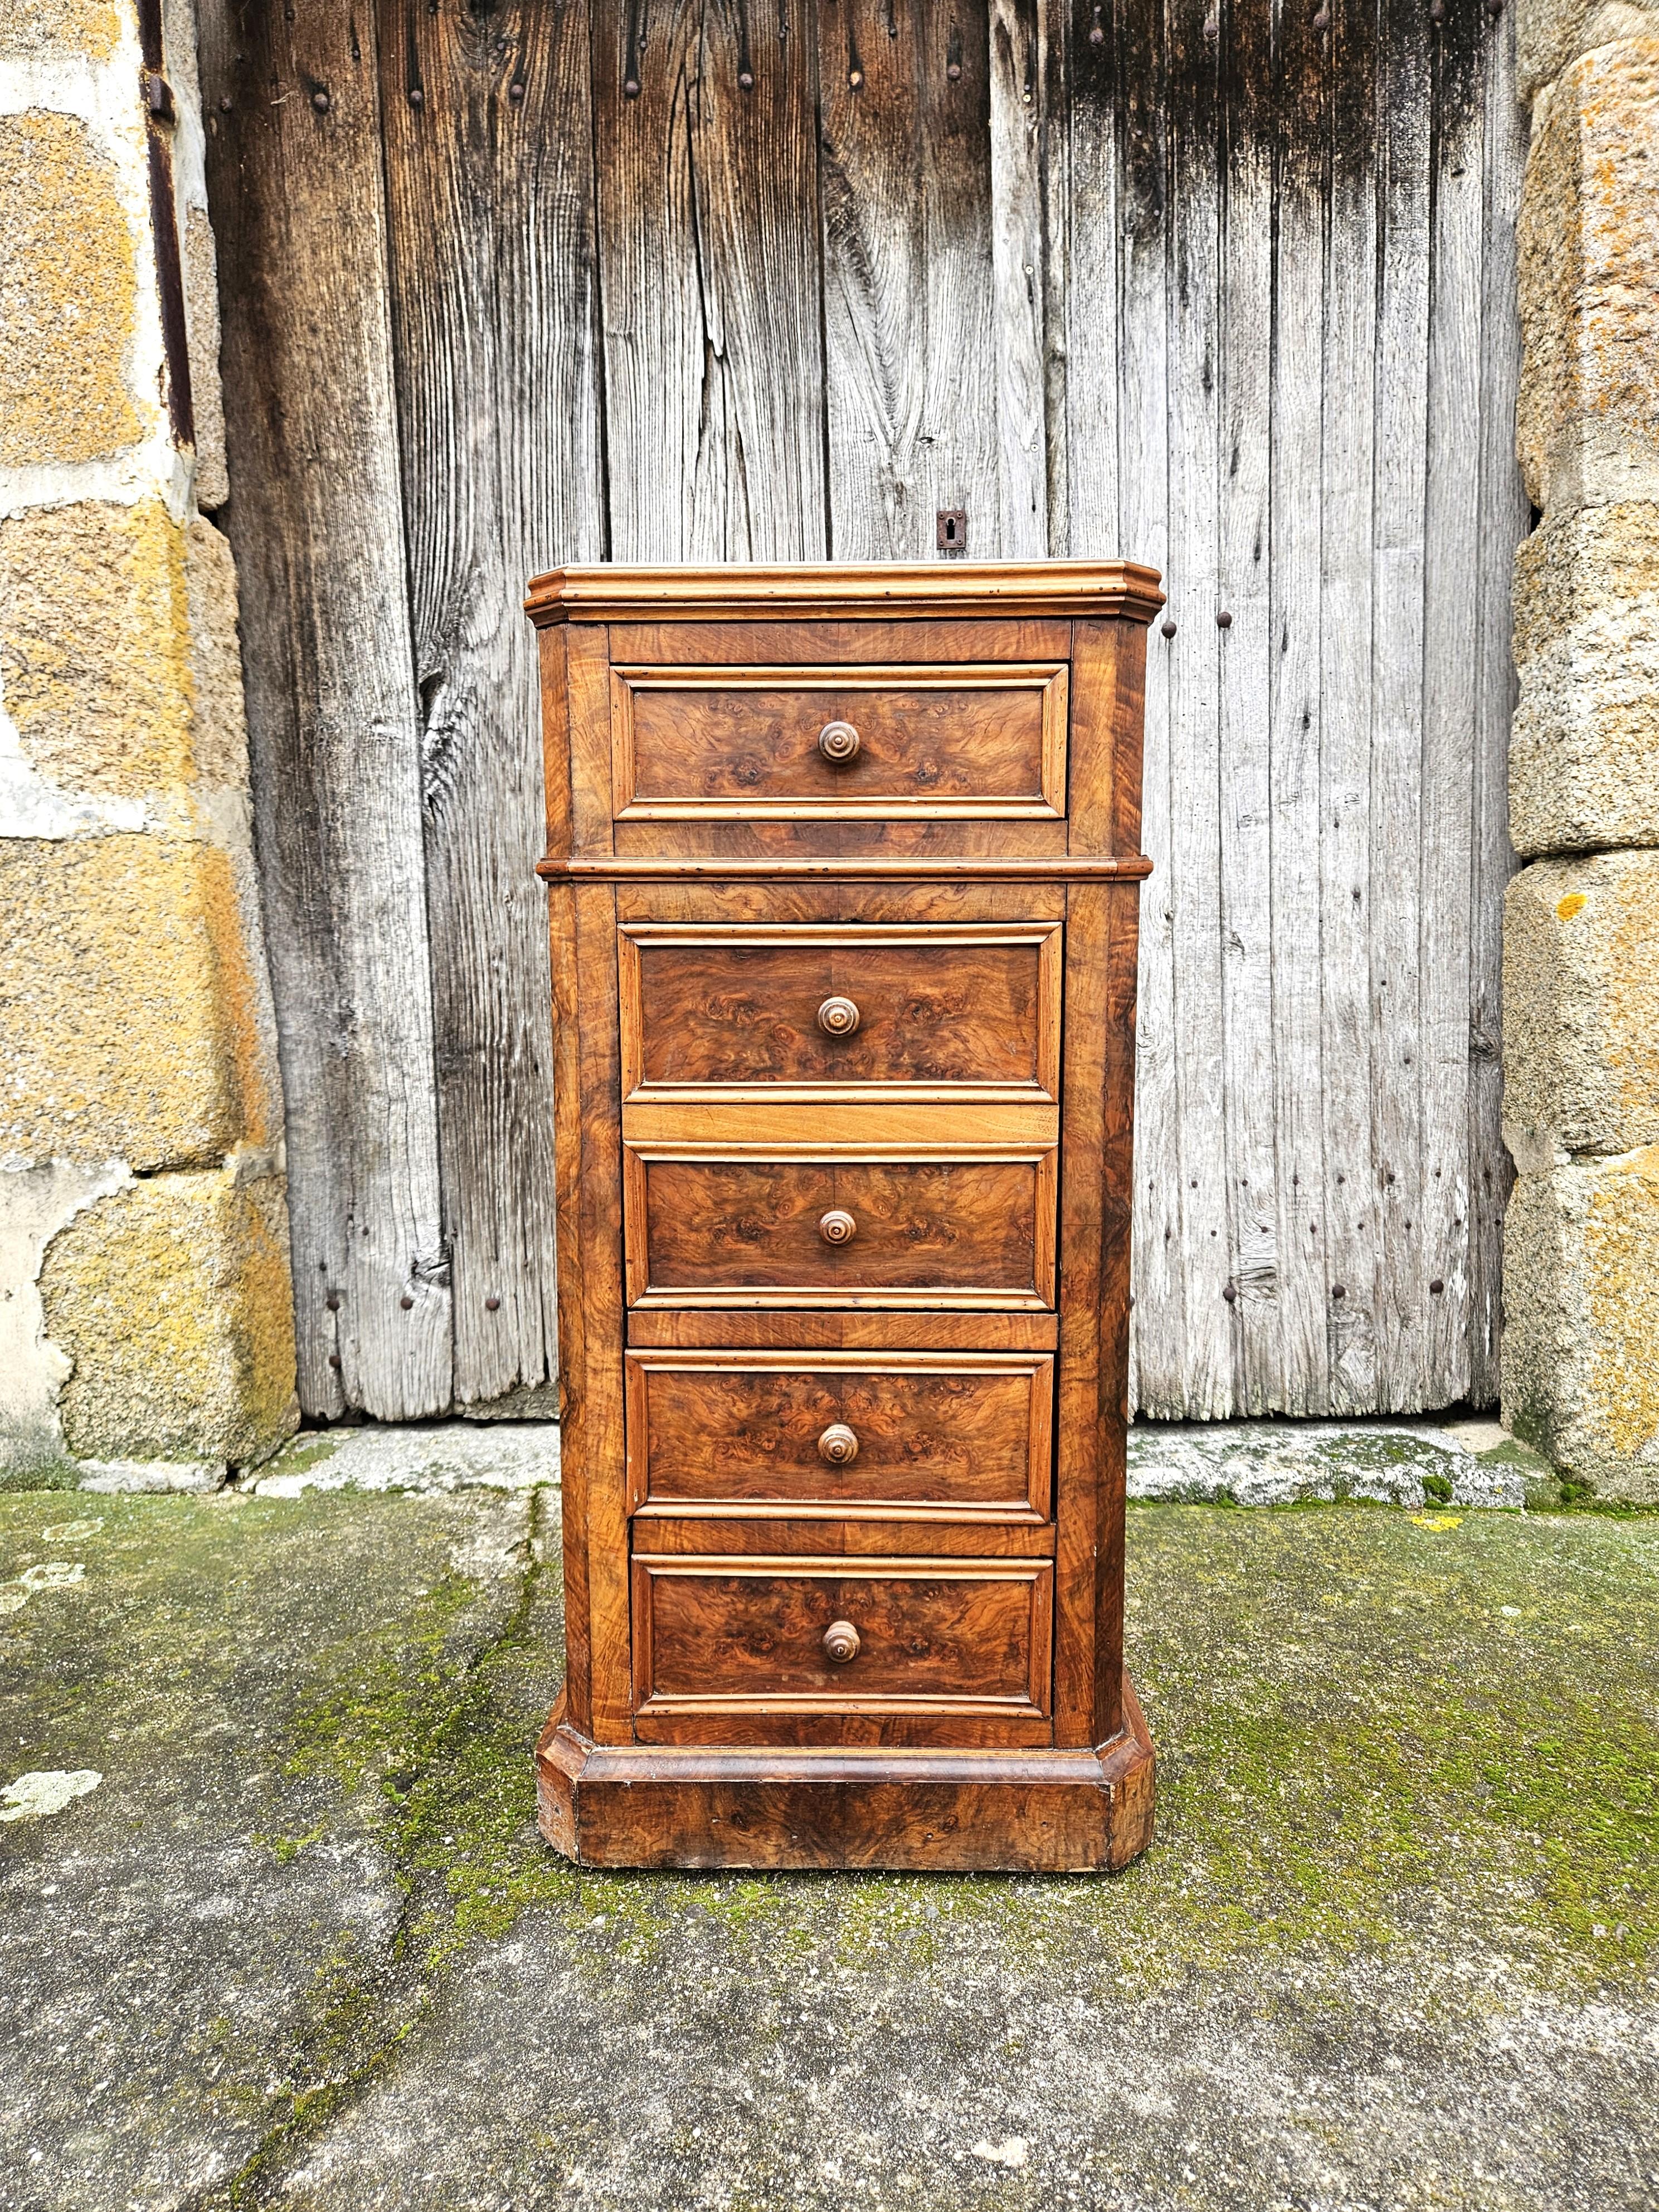 French Vintage Nightstand- Bedside Table - Bedside Console - Louis Philippe late 19th Century.
Made of Walnut with veneer of burled Walnut Front - very solid handicraft .
It has three Drawers and a Door that hinges open to reveal an Interior